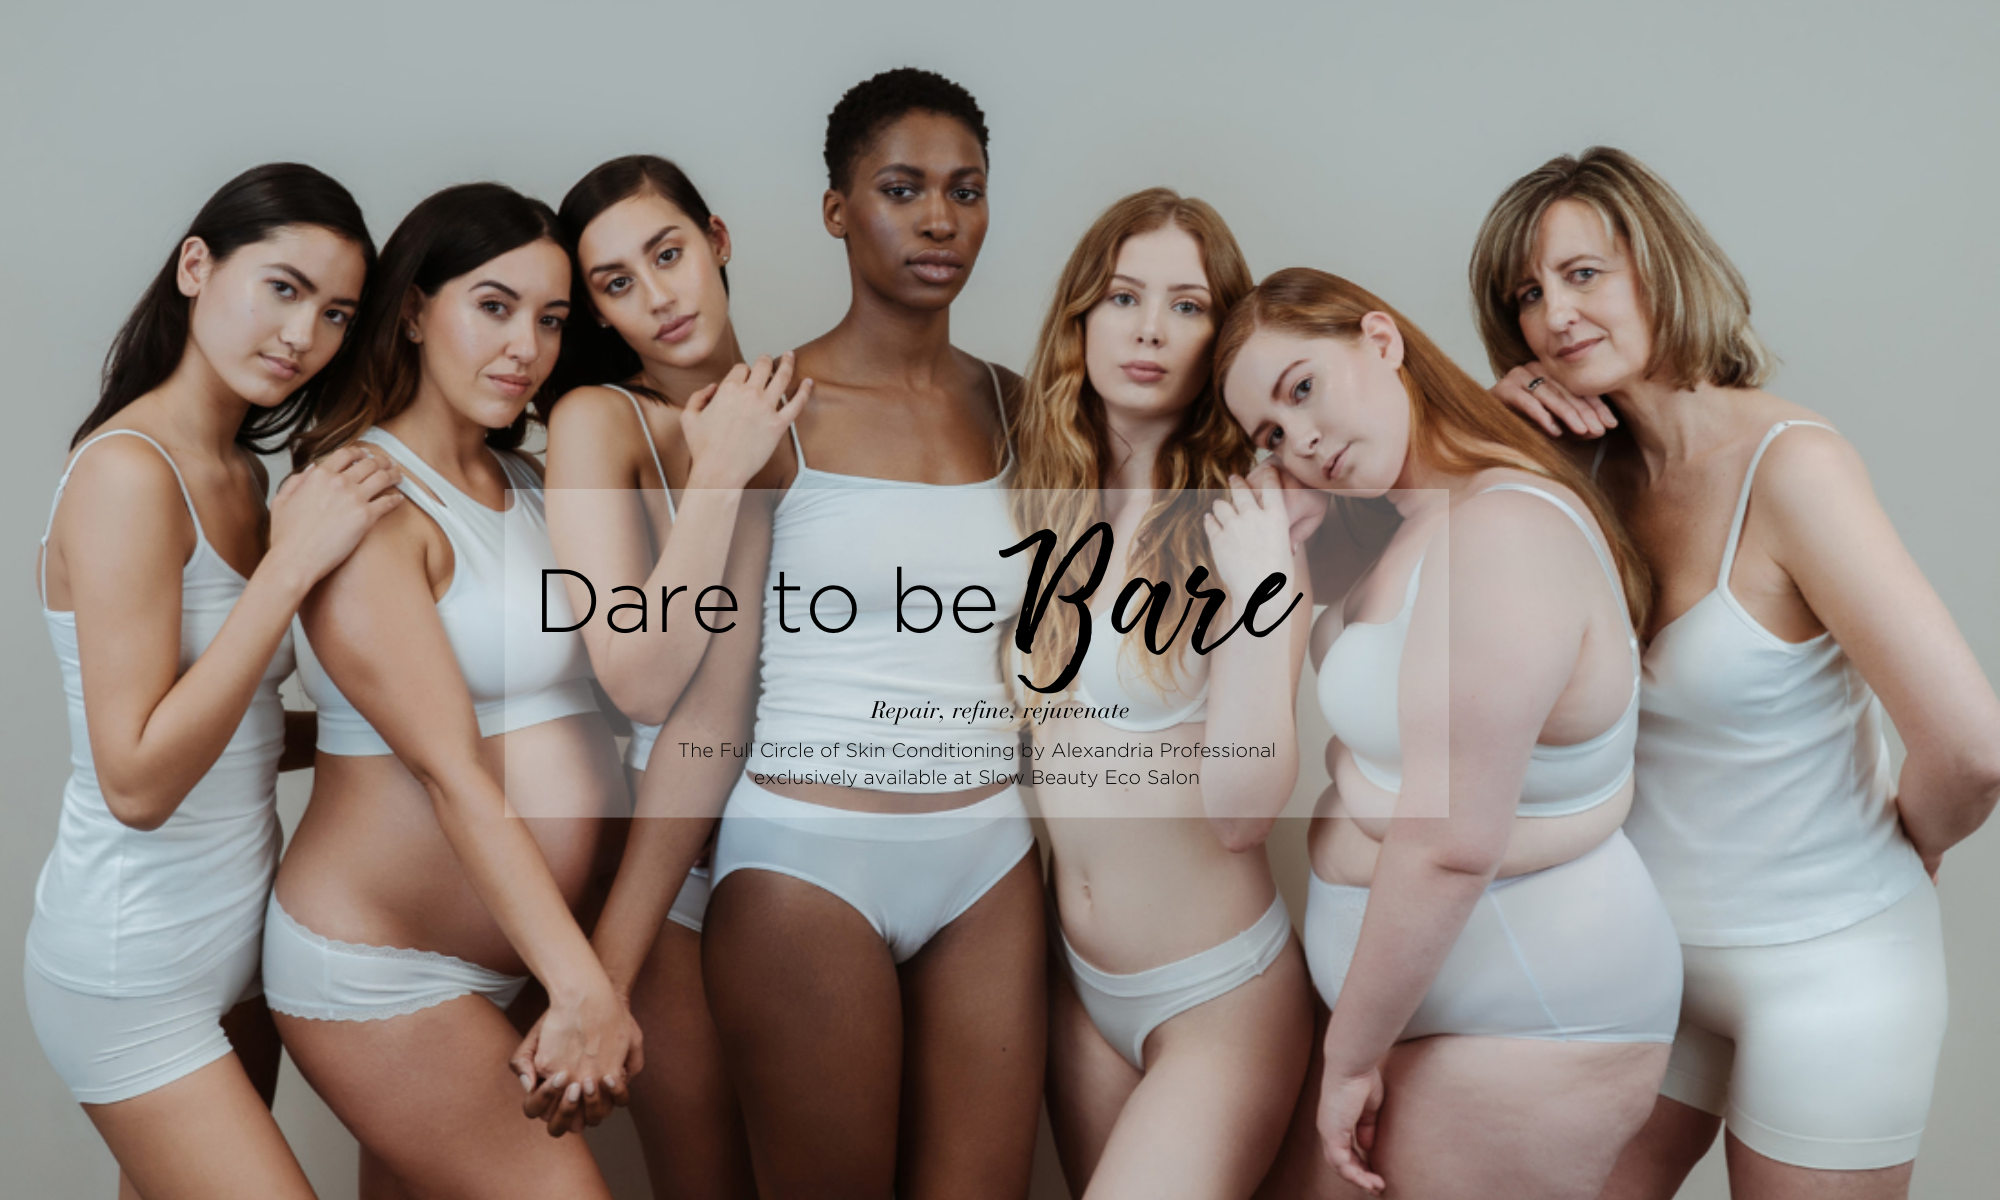 Dare to be Bare. The Full Circle of Skin Conditioning, exclusively available at Slow Beauty Eco Salon.